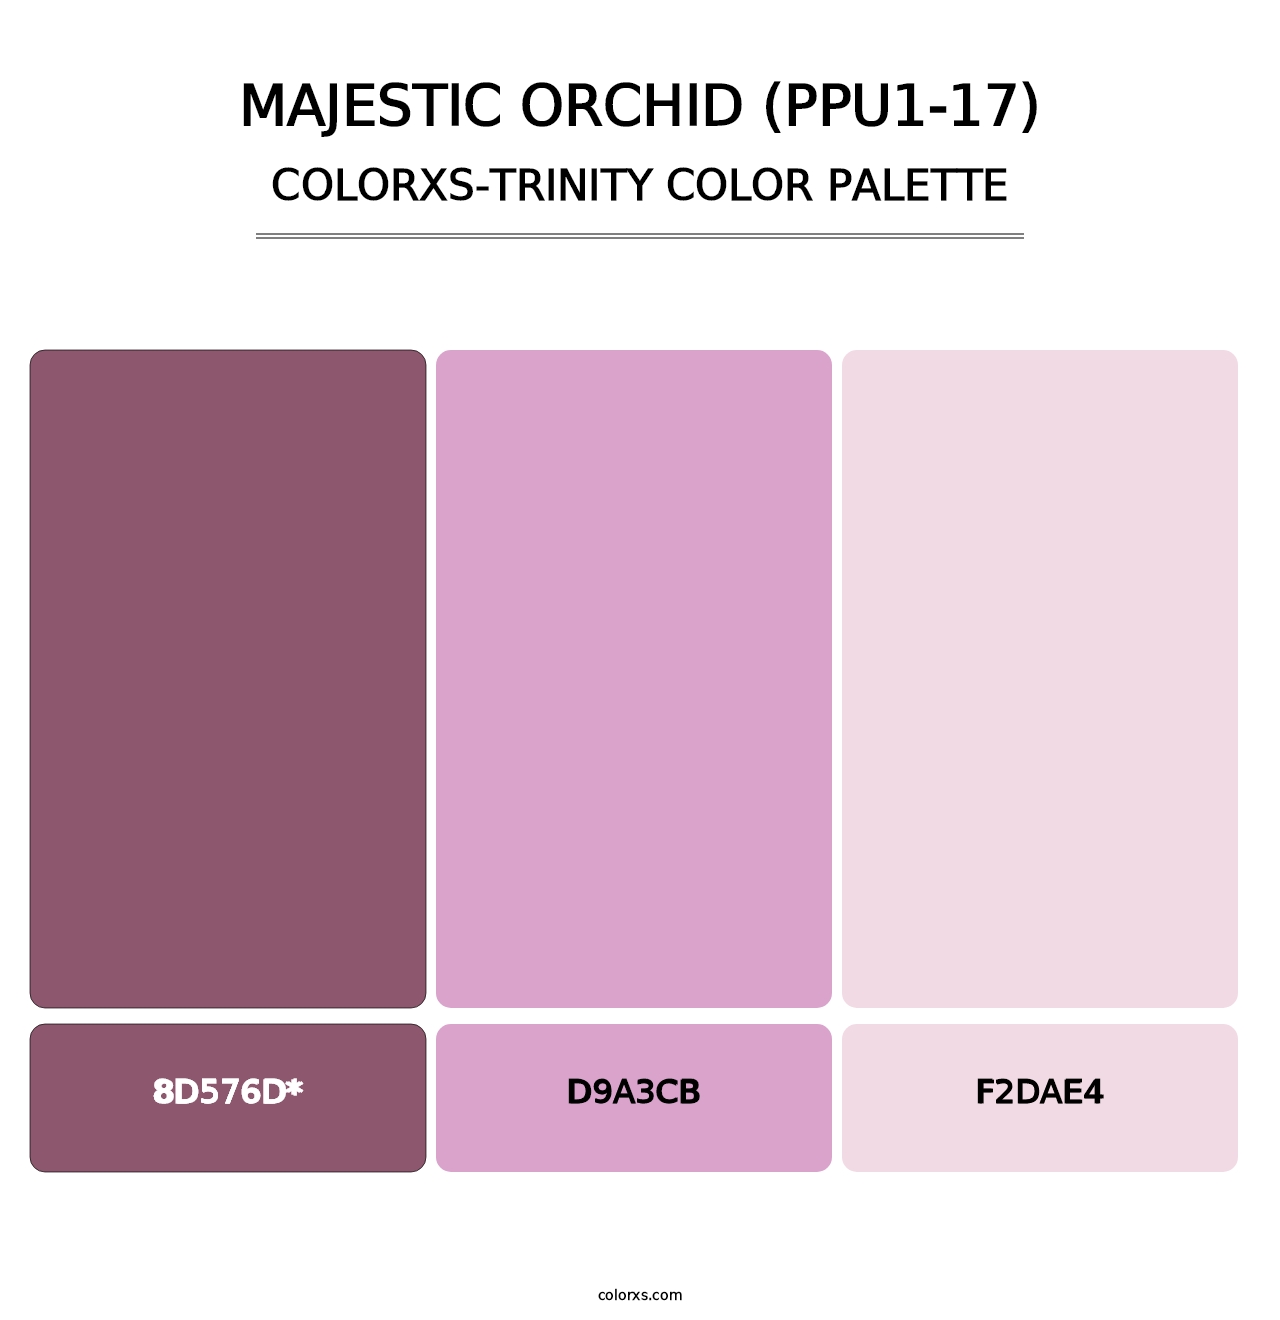 Majestic Orchid (PPU1-17) - Colorxs Trinity Palette